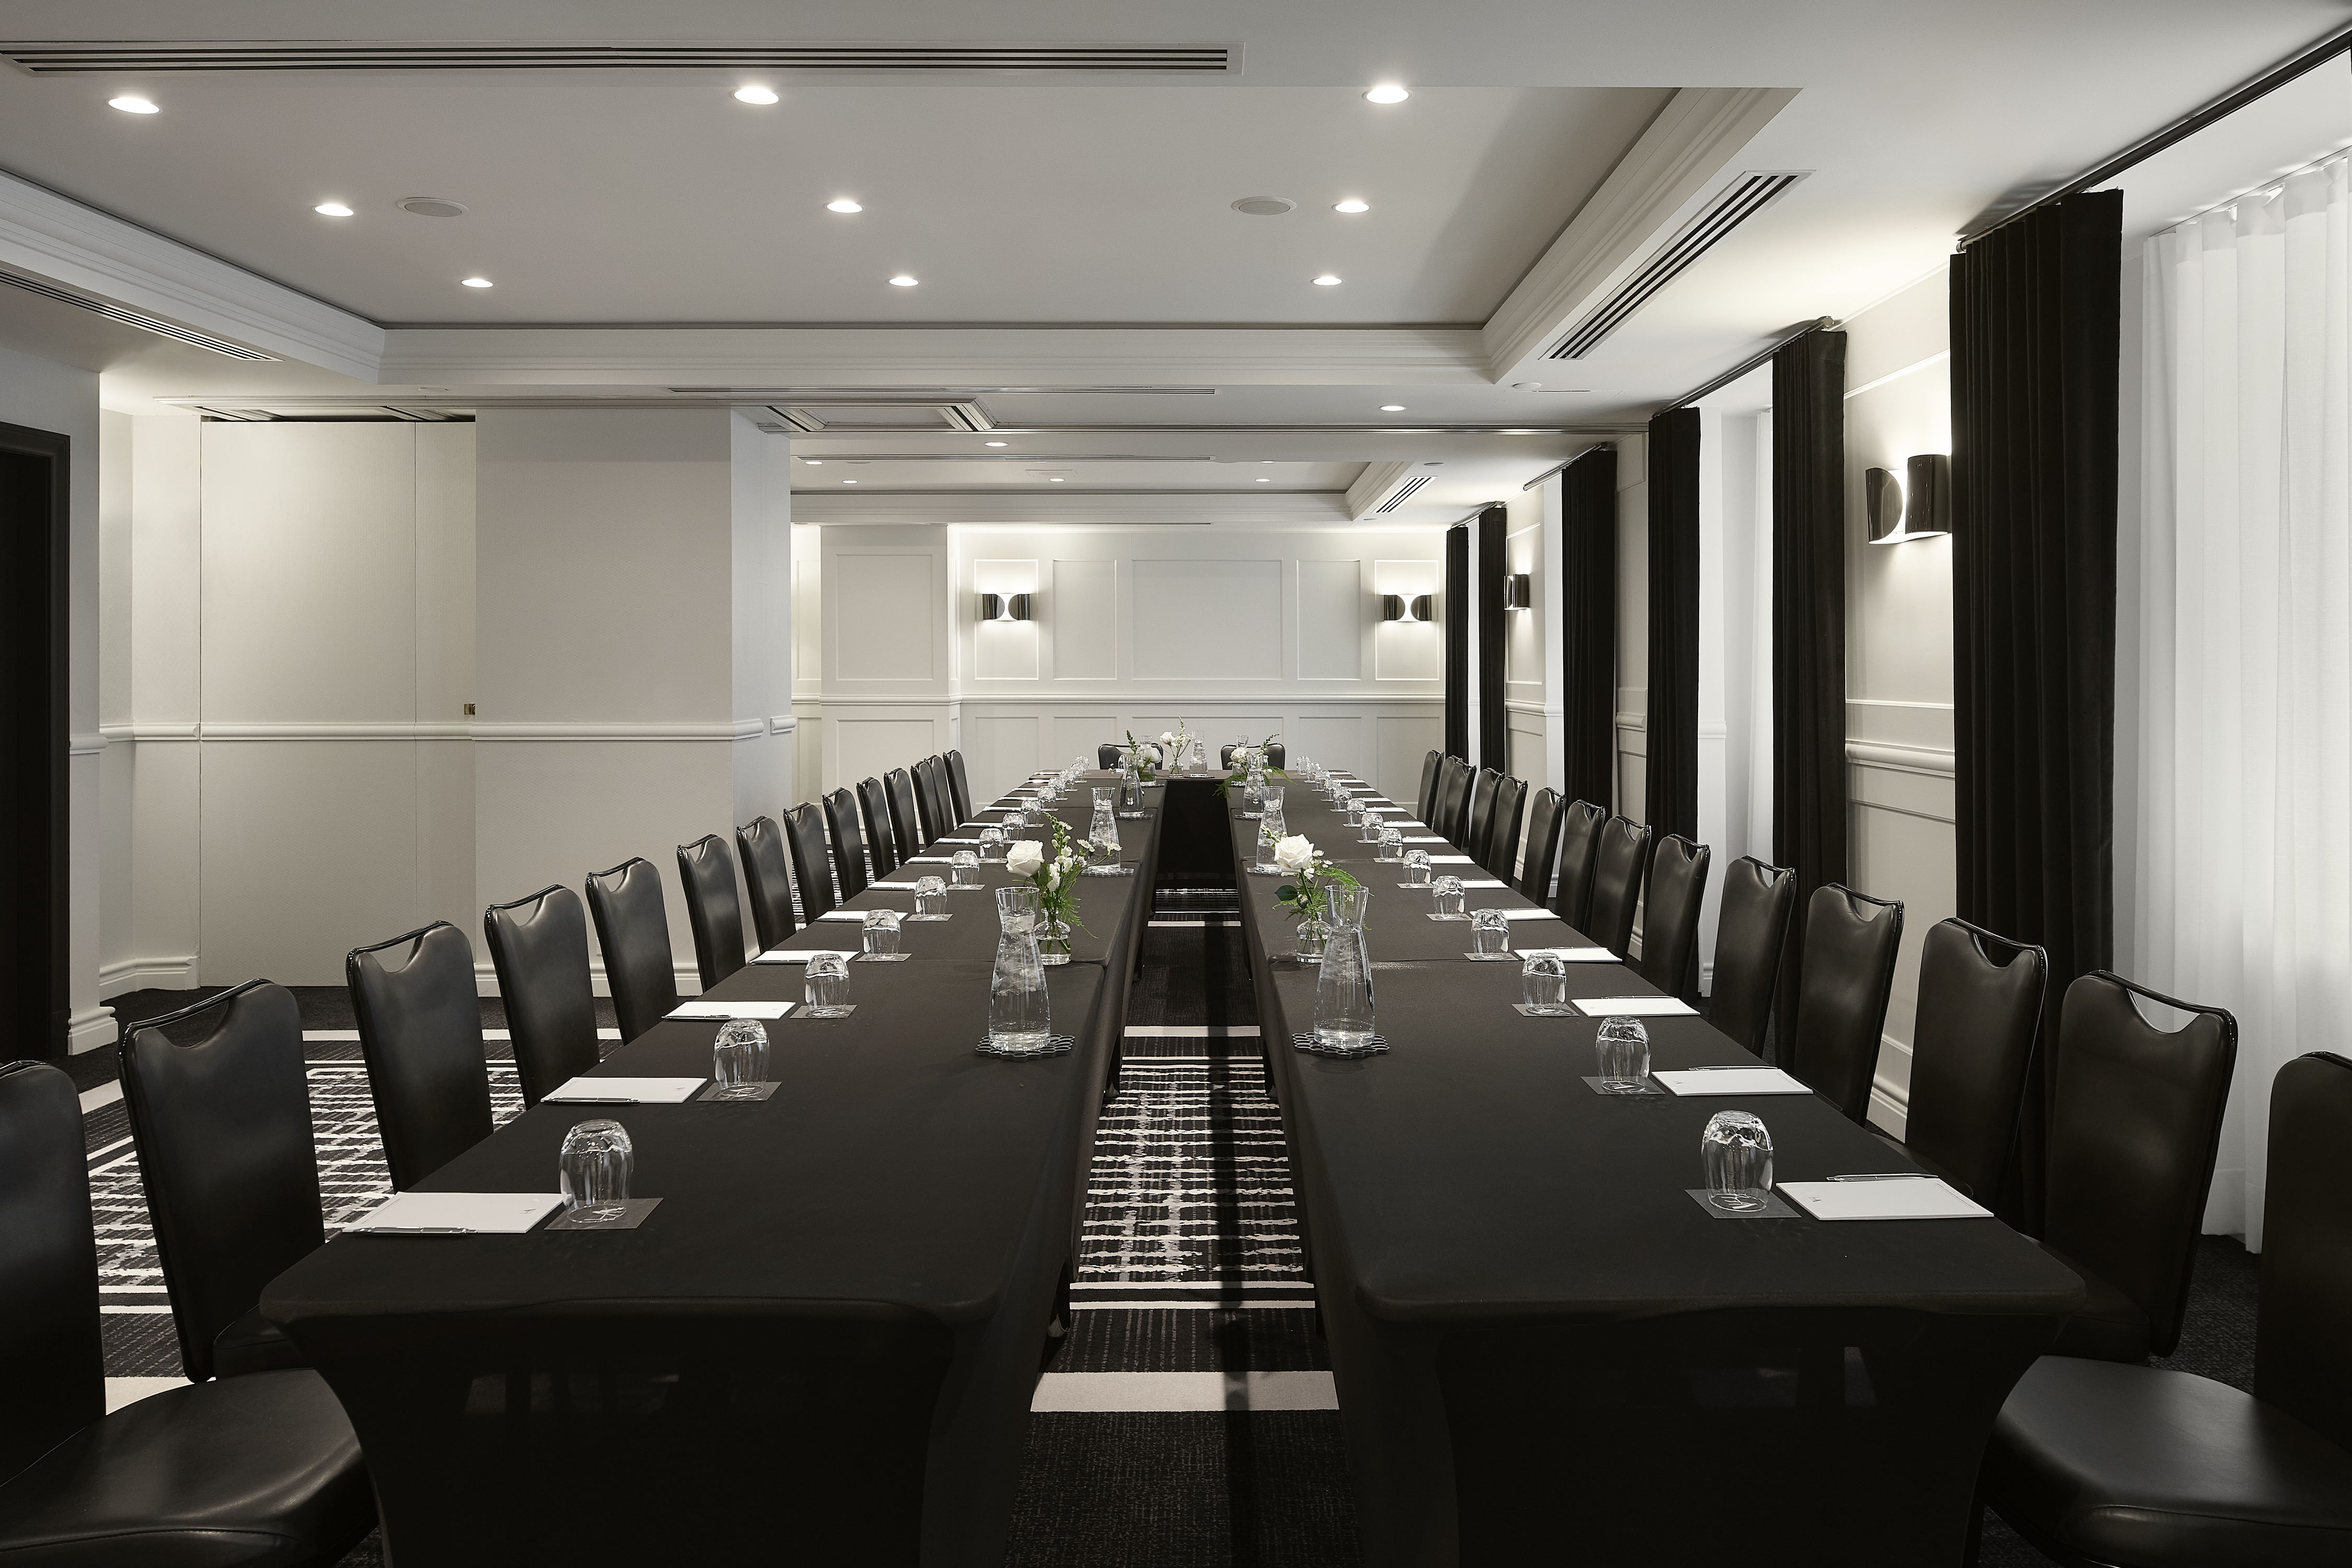 Meeting Room With Executive Table